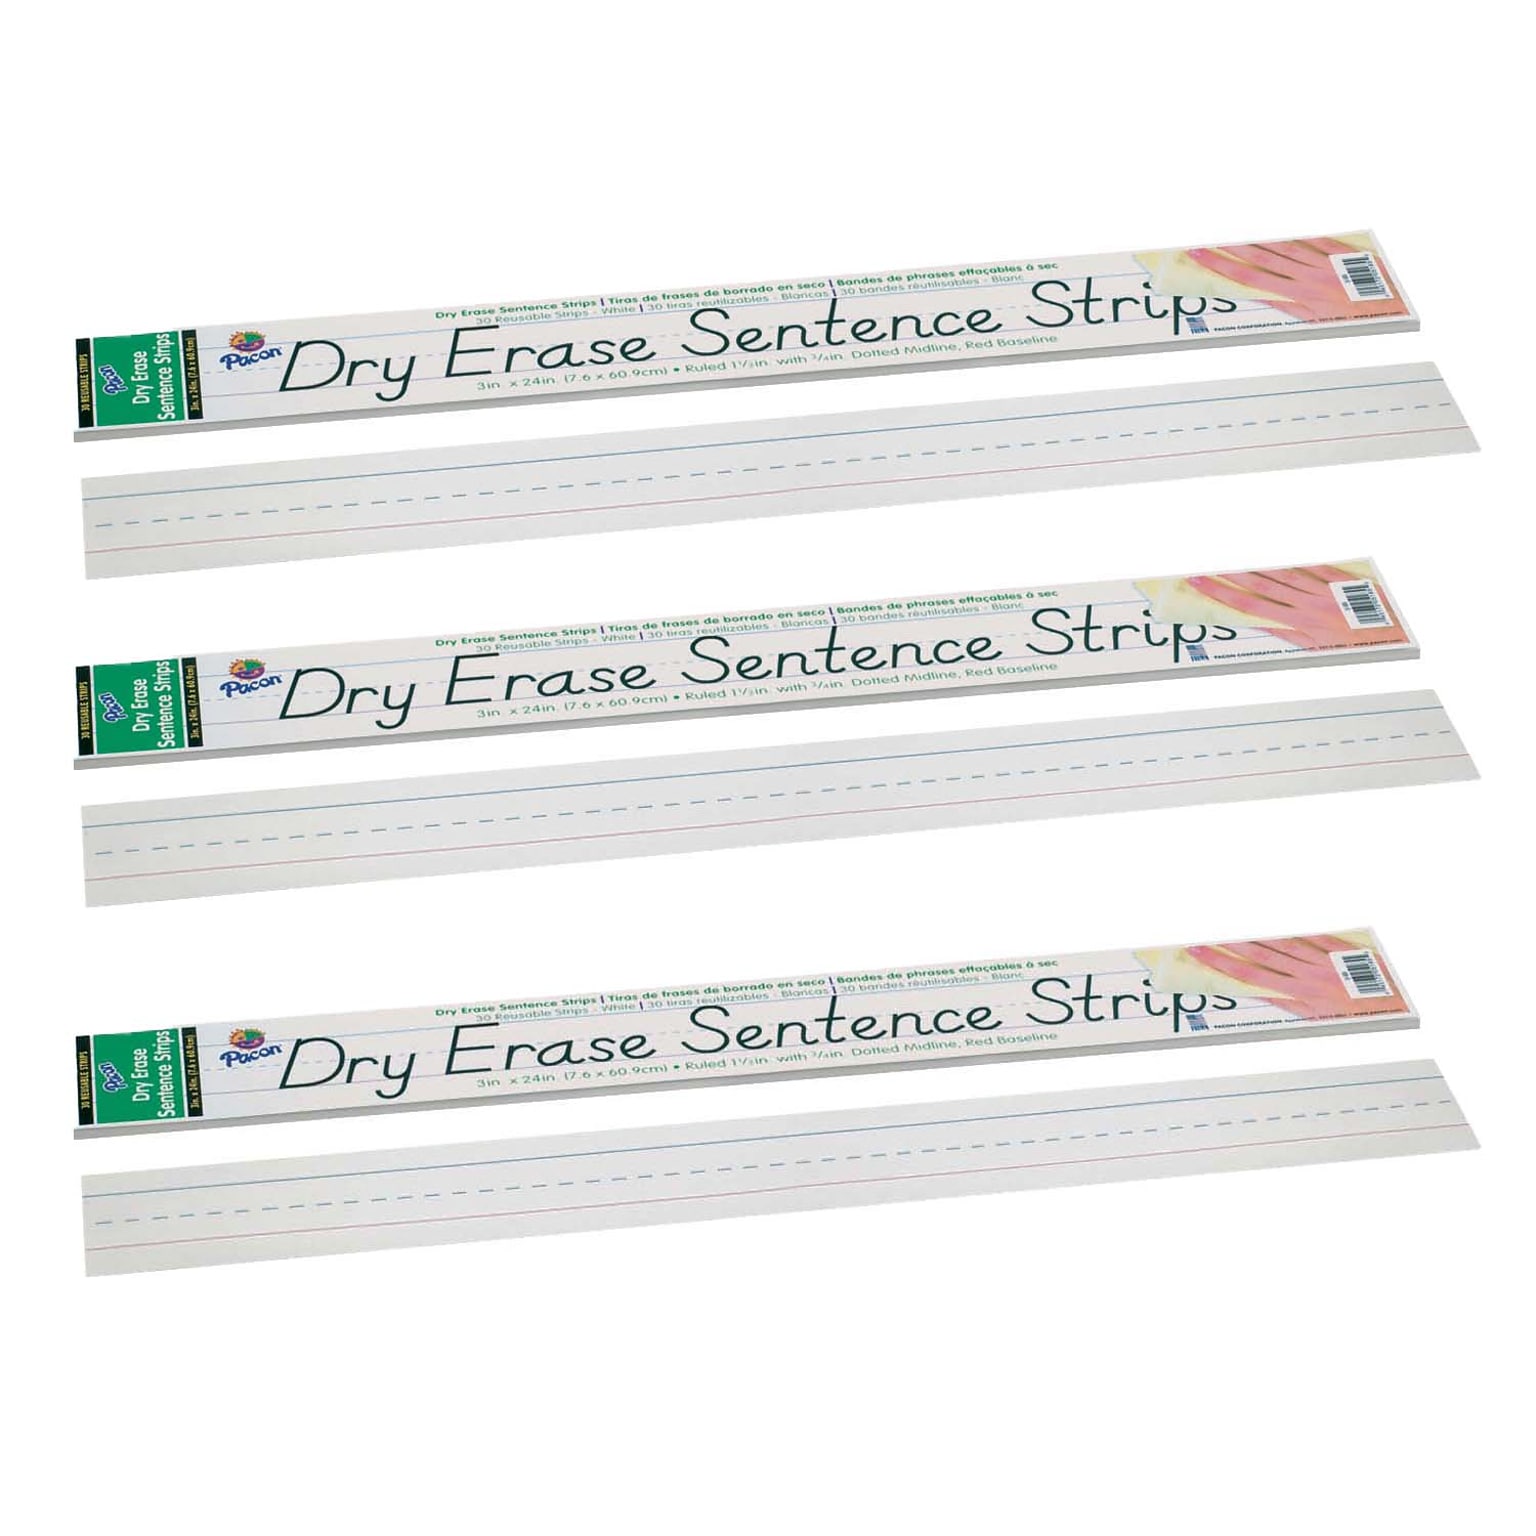 Pacon Dry Erase Sentence Strips, White, 1-1/2 x 3/4 Ruled, 3 x 24, 30 Per Pack, 3 Packs (PAC5185-3)